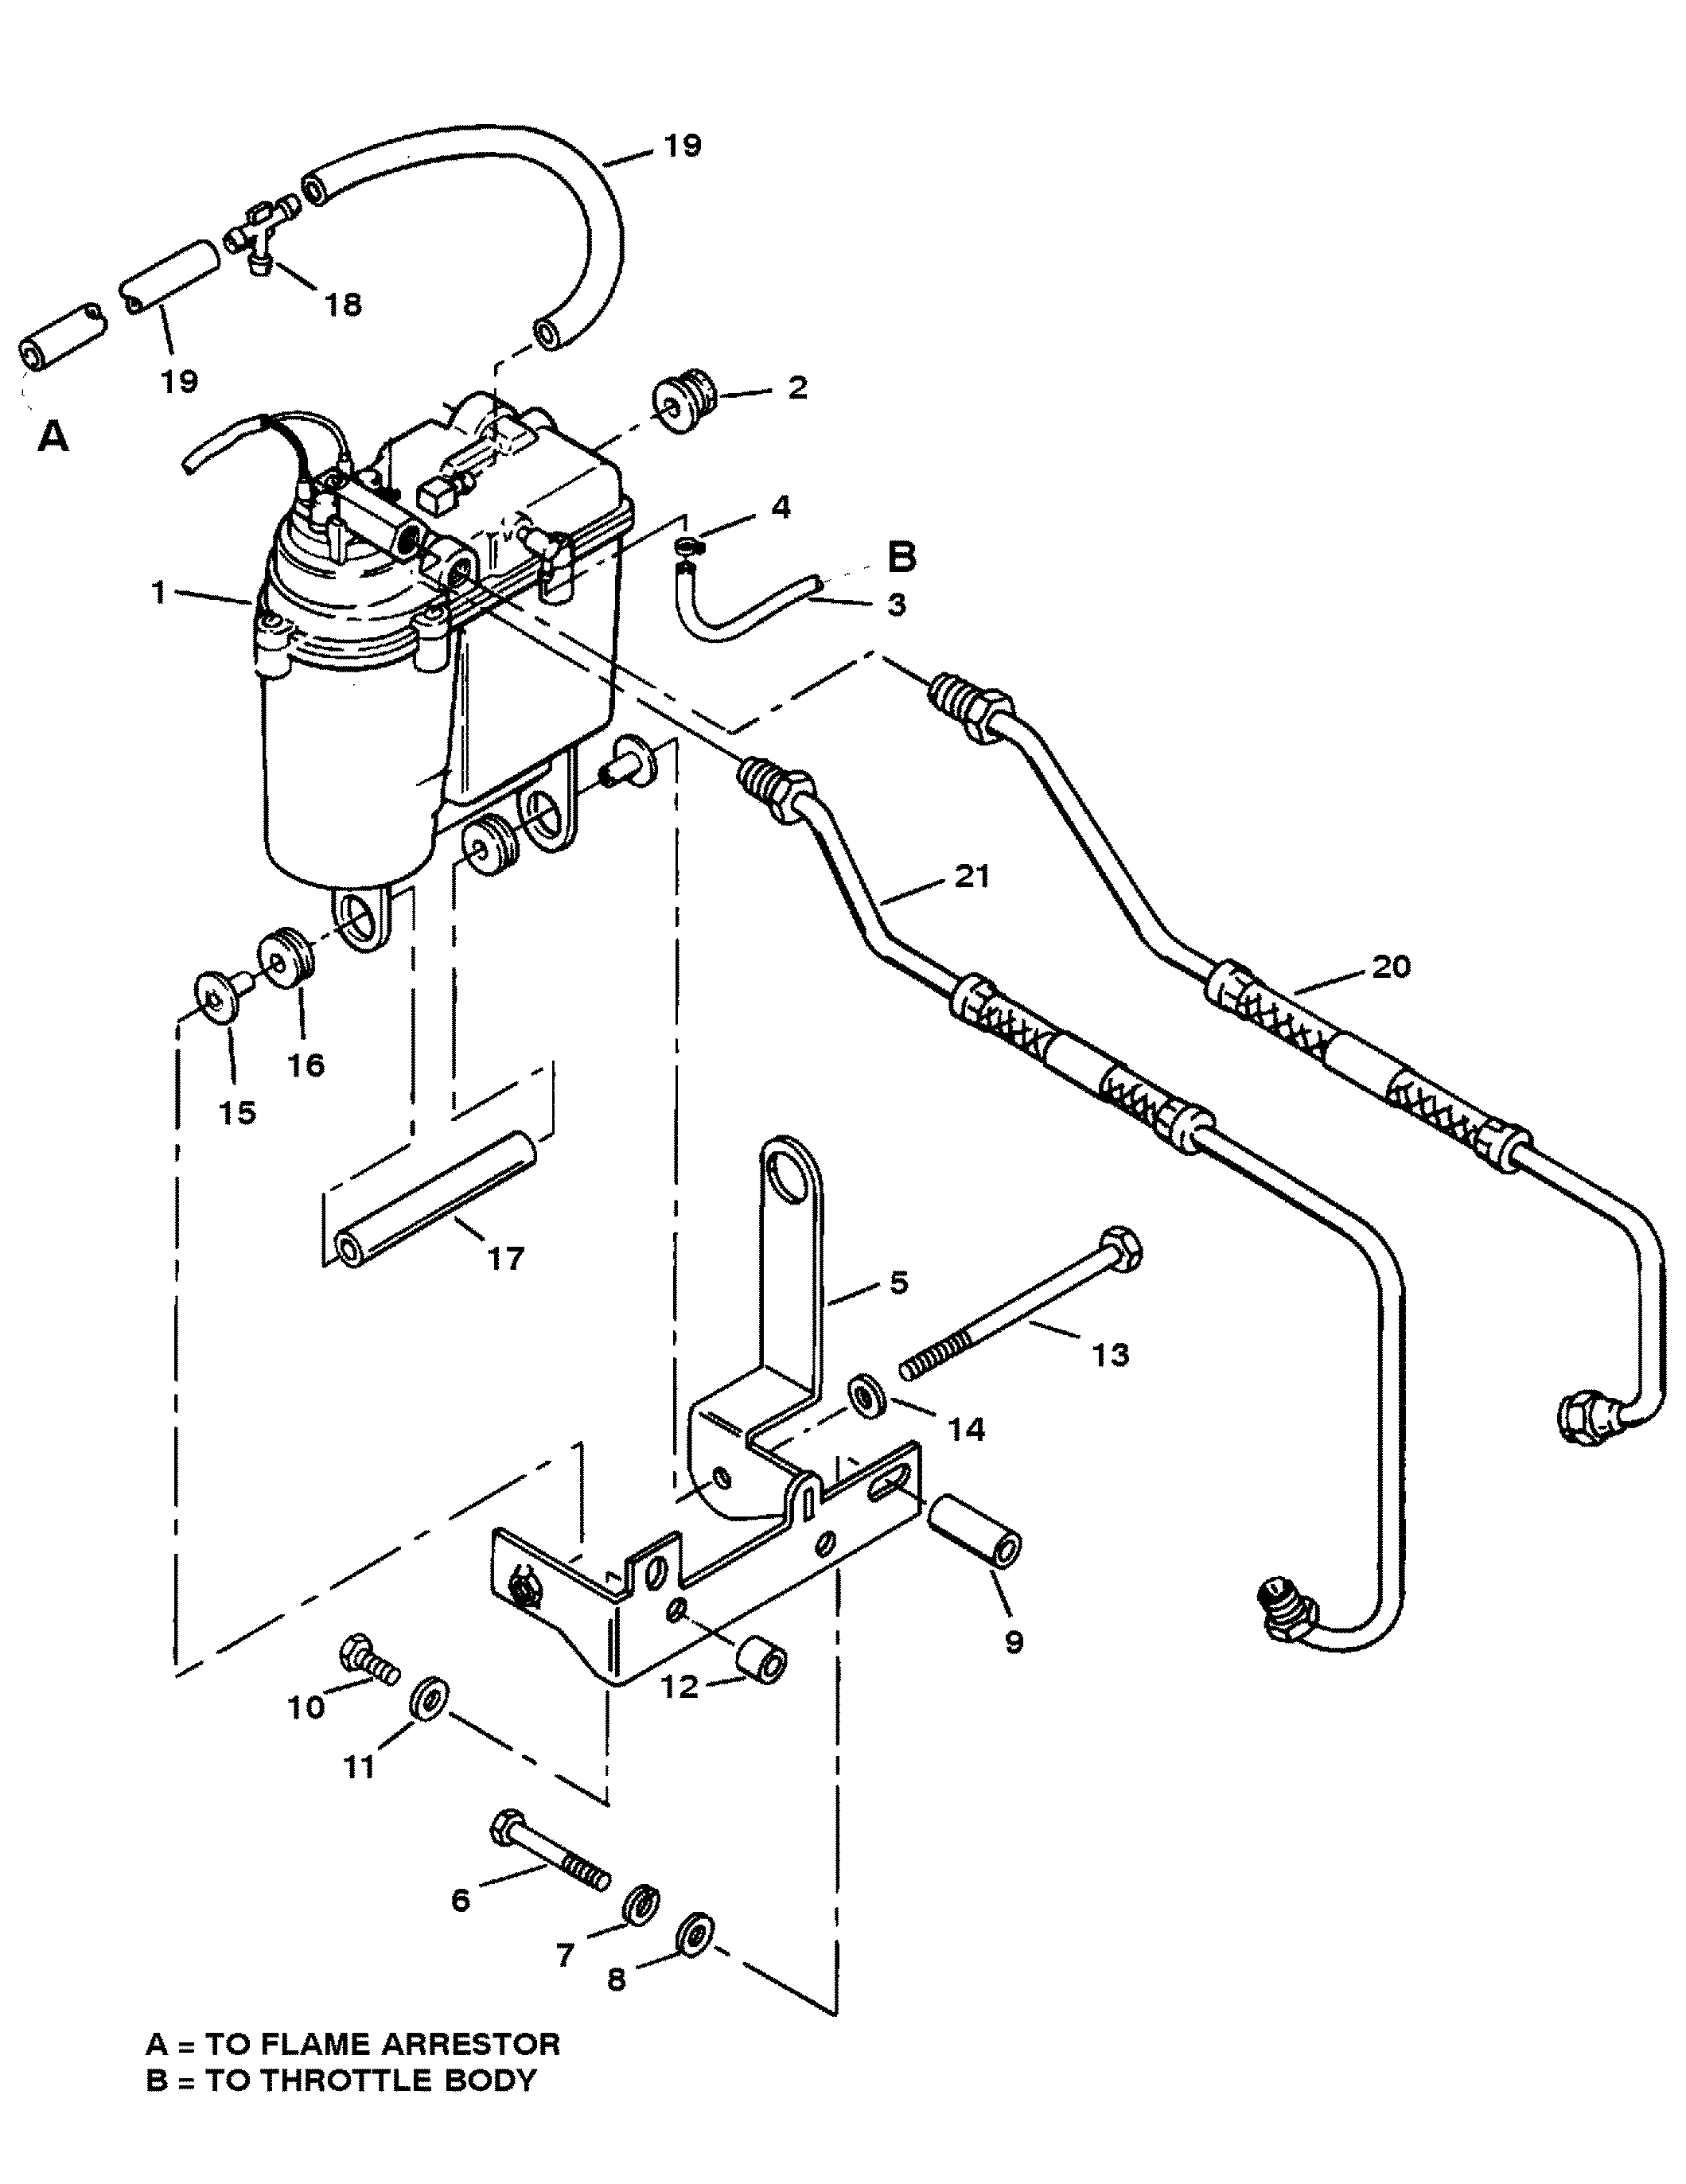 VAPOR SEPARATOR TANK AND FUEL LINES